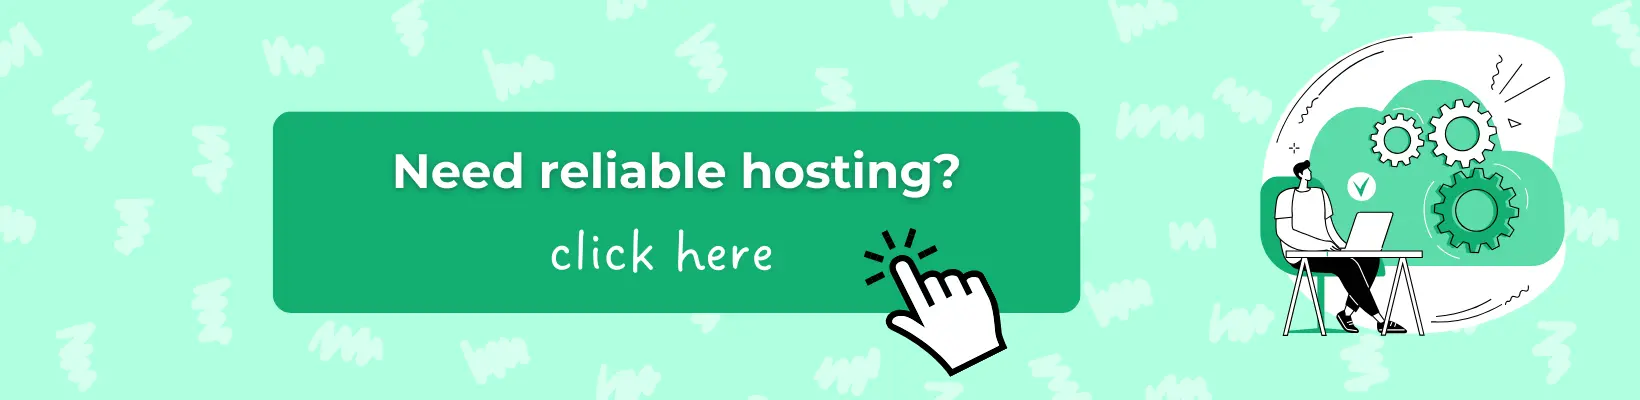 Rent reliable hosting for the site